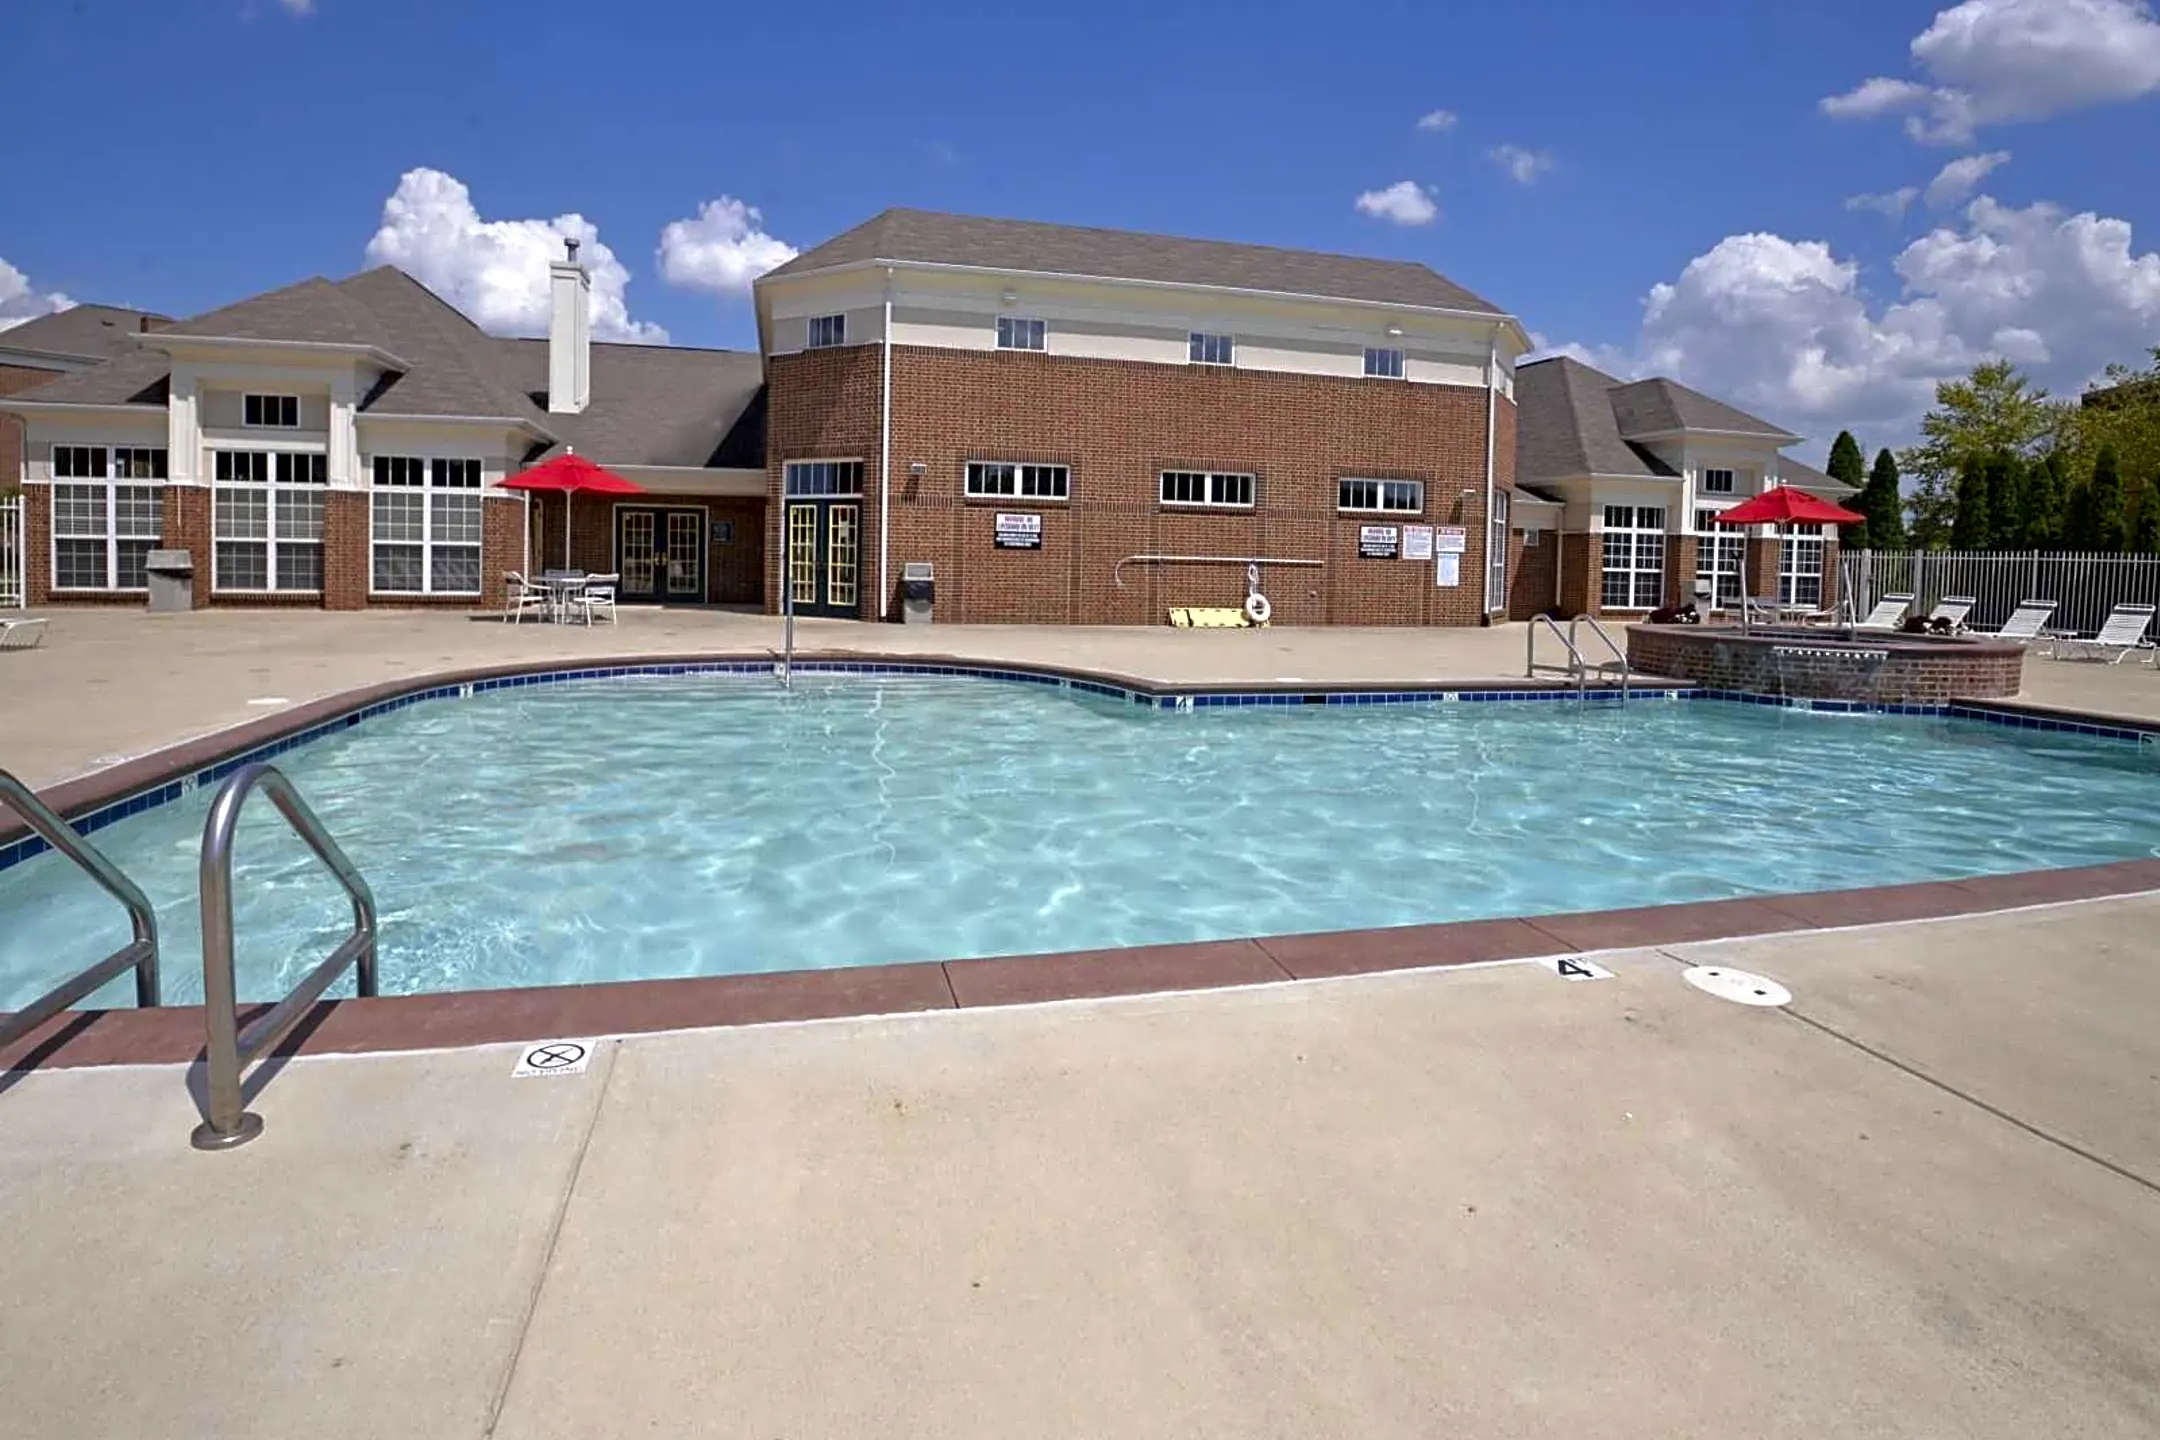 Pool - North Haven of Carmel Apartments - Carmel, IN